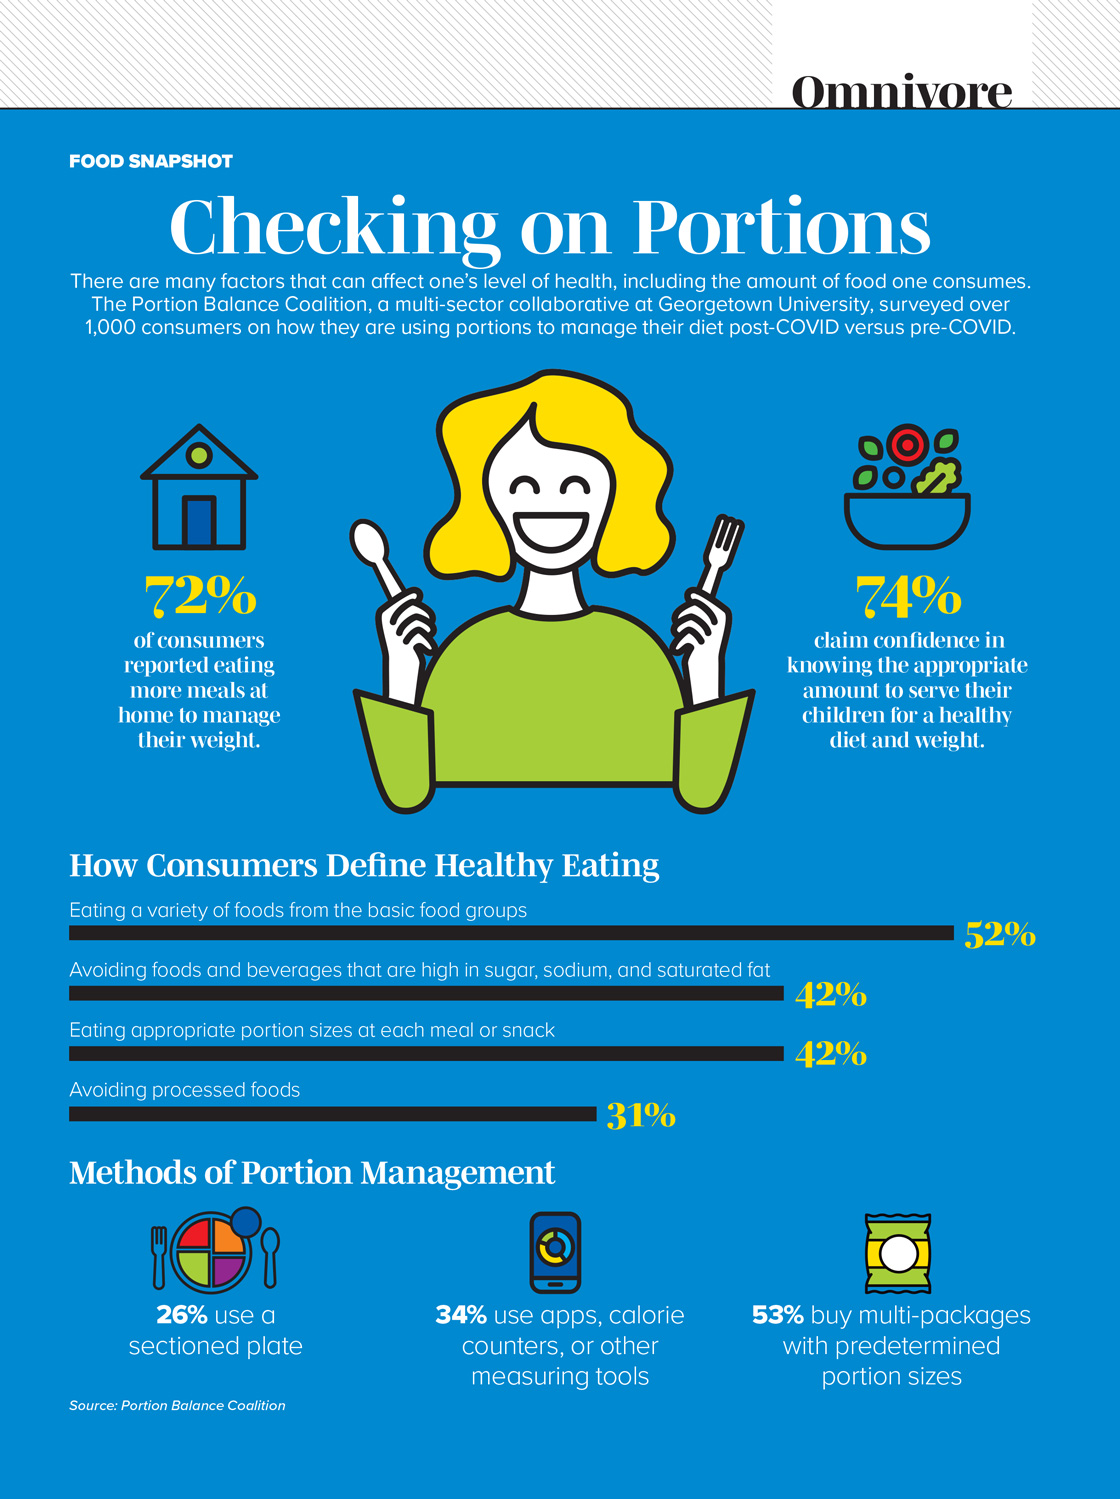 How consumers use portion control to manage their diet